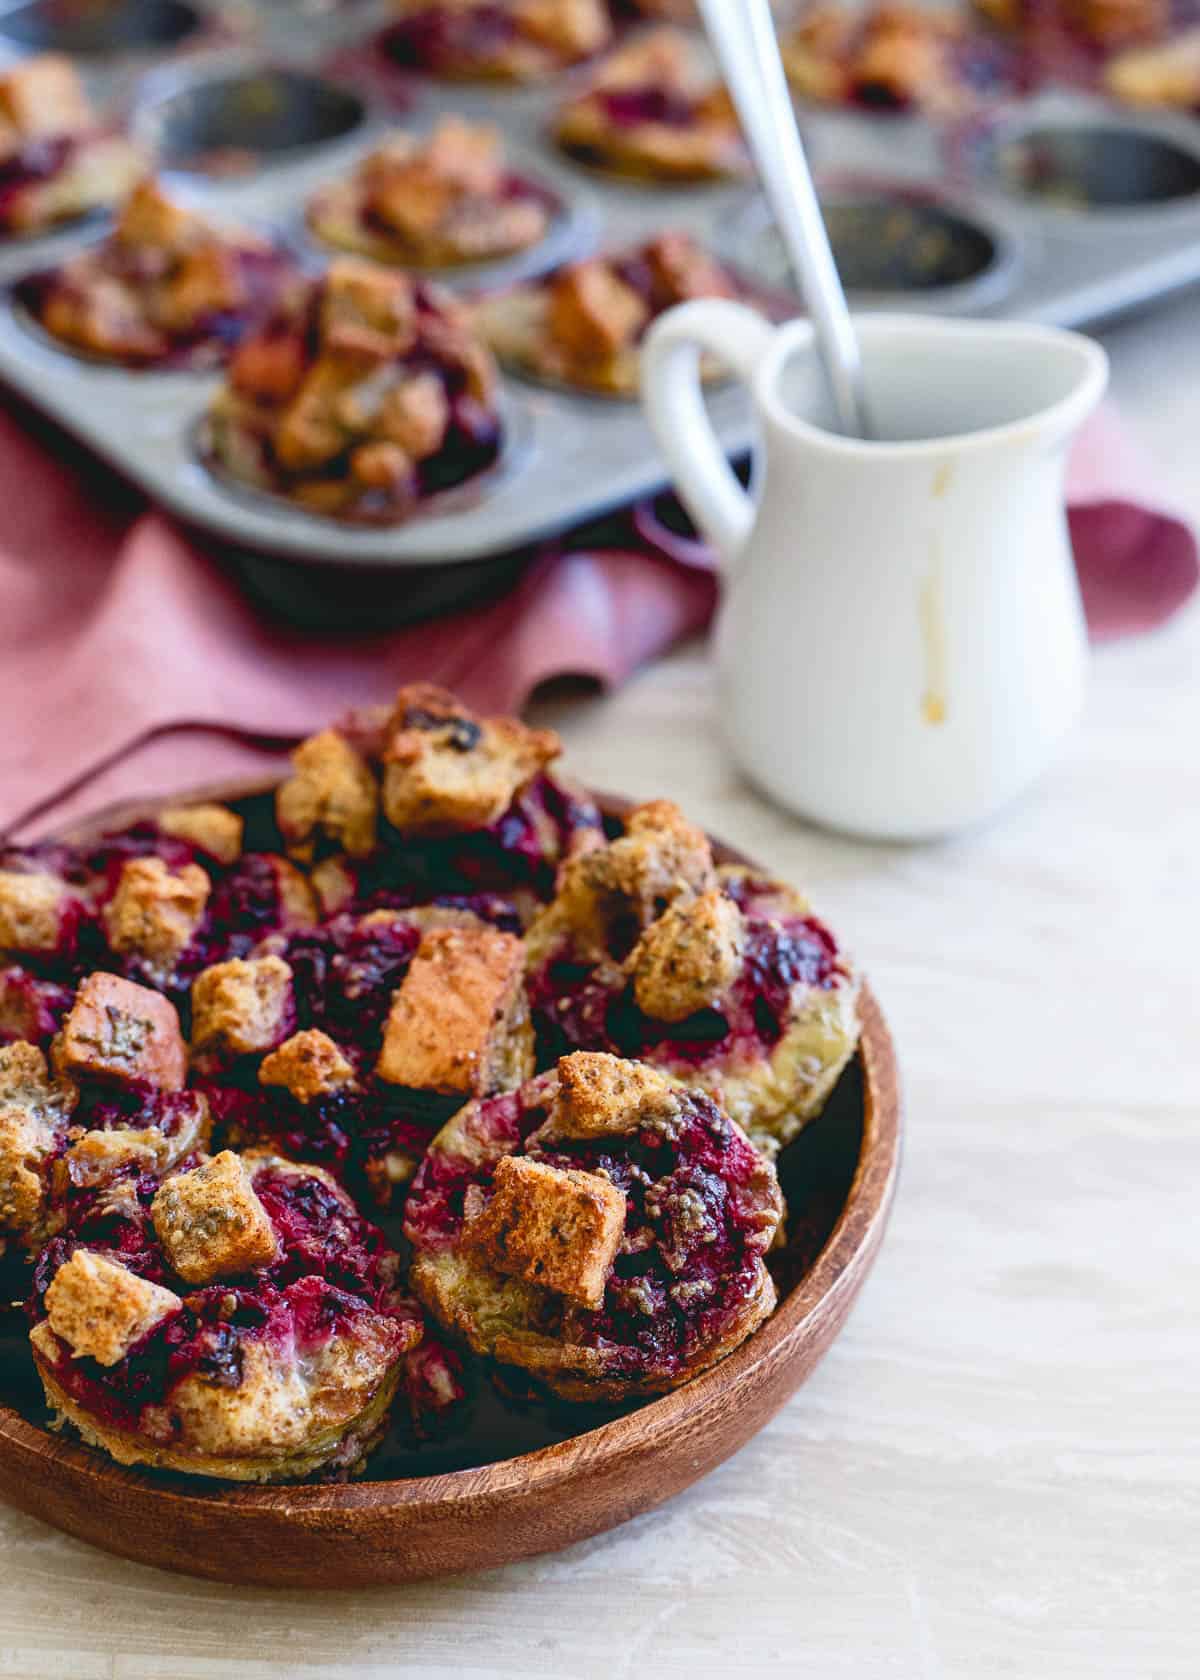 These cinnamon raisin French toast bites are bursting with fresh blackberry ginger sauce. Baked in a mini-muffin tin, they're the perfect size for breakfast on the go!